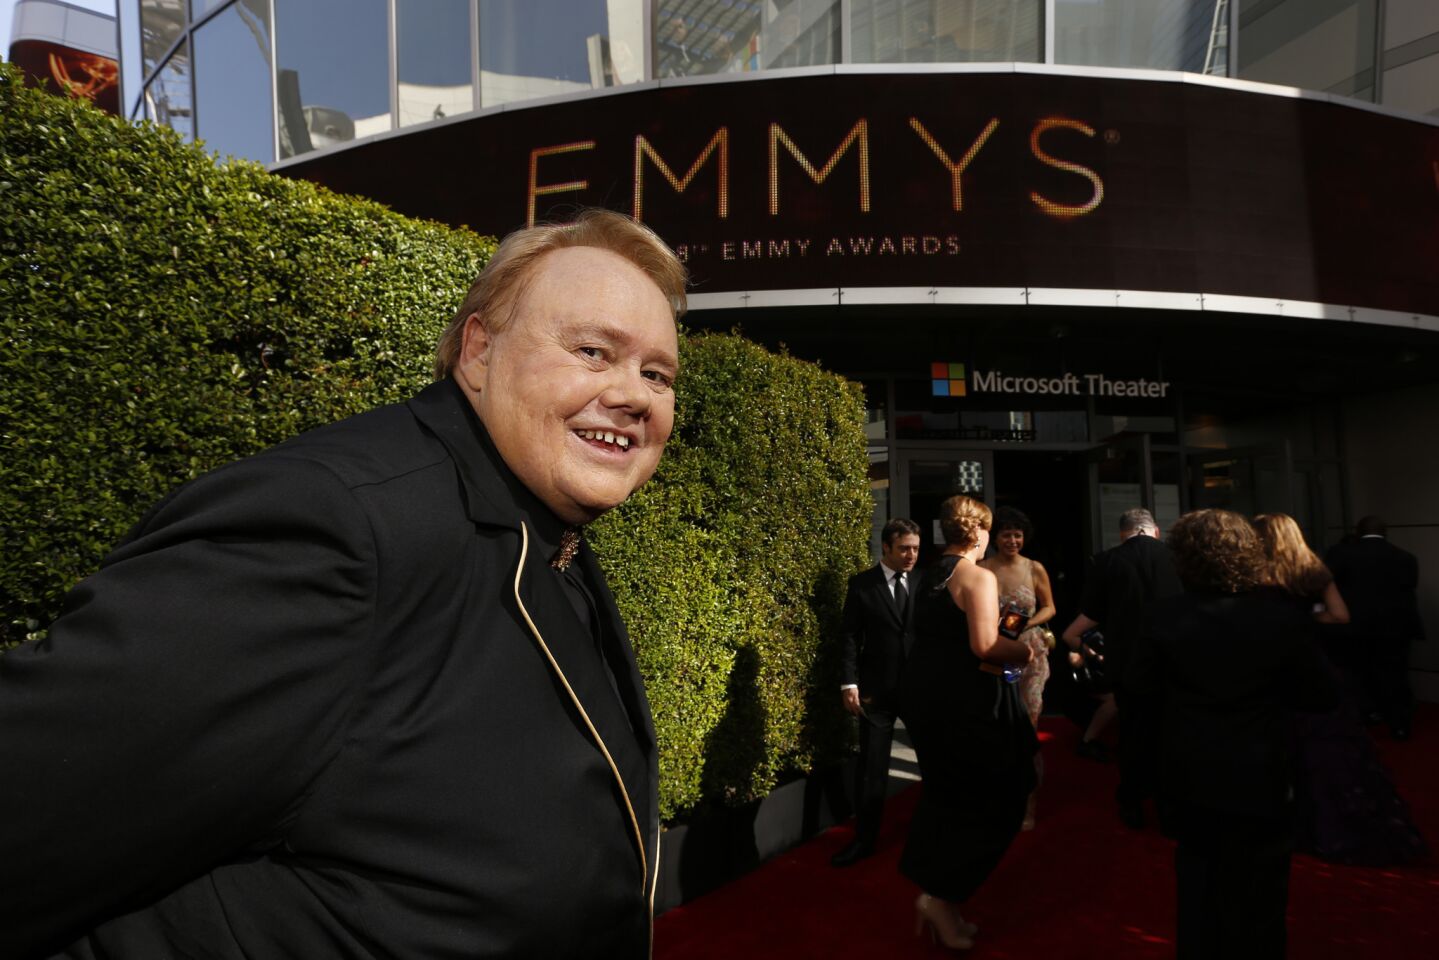 Louie Anderson gets ready to enter the Microsoft Theater.